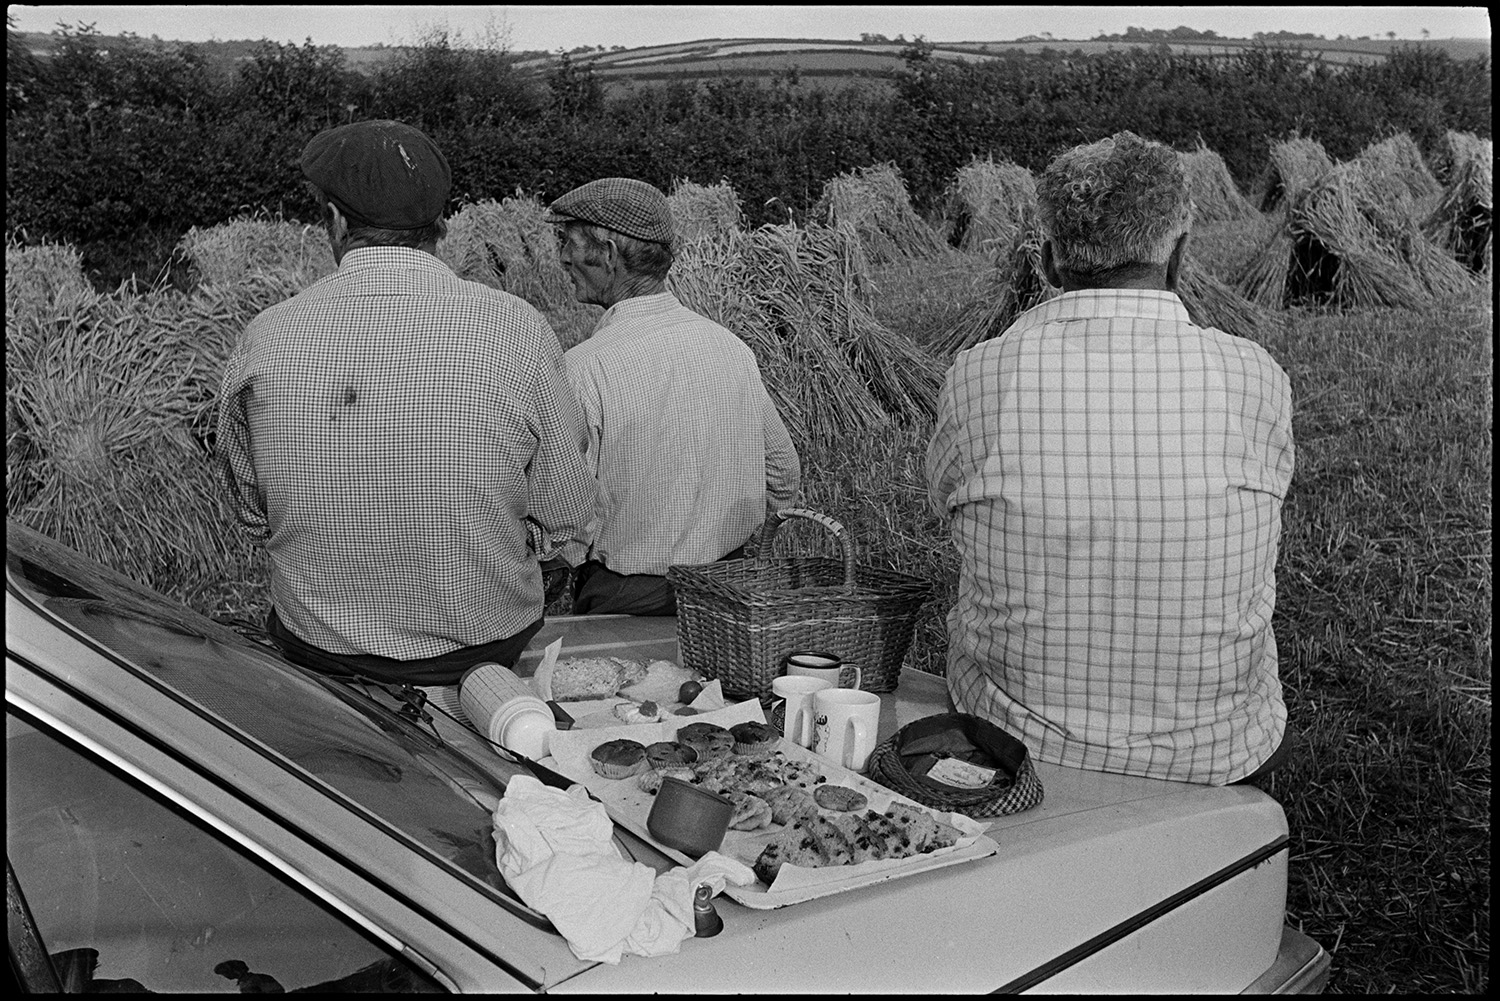 Harvesters tea break, leaning on car, woman, farmer's wife pouring from kettle, dog. 
[Three men, possibly from the Down family, sat on the bonnet of a car having a tea break from harvesting in a field at Spittle Farm, Chulmleigh. Cakes, mugs, a thermos flask and a basket are also laid out on the car bonnet. Stooks of corn can be seen in the field in the background.]